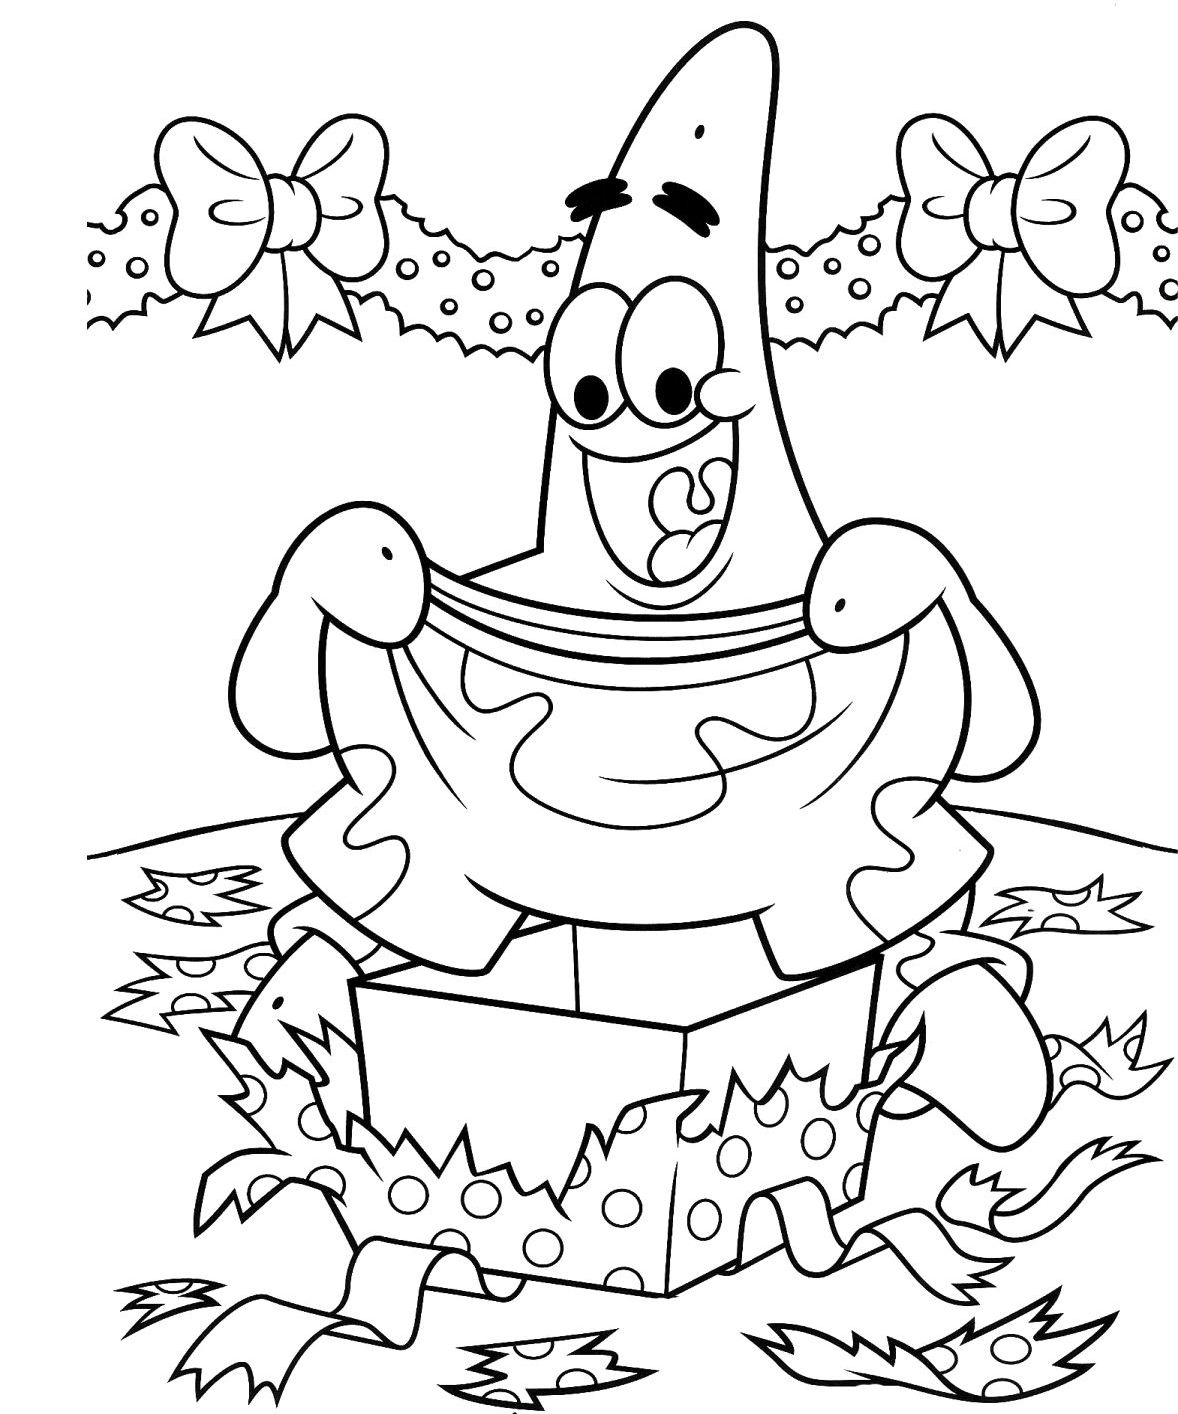 spongebob-christmas-coloring-pages-coloring-home